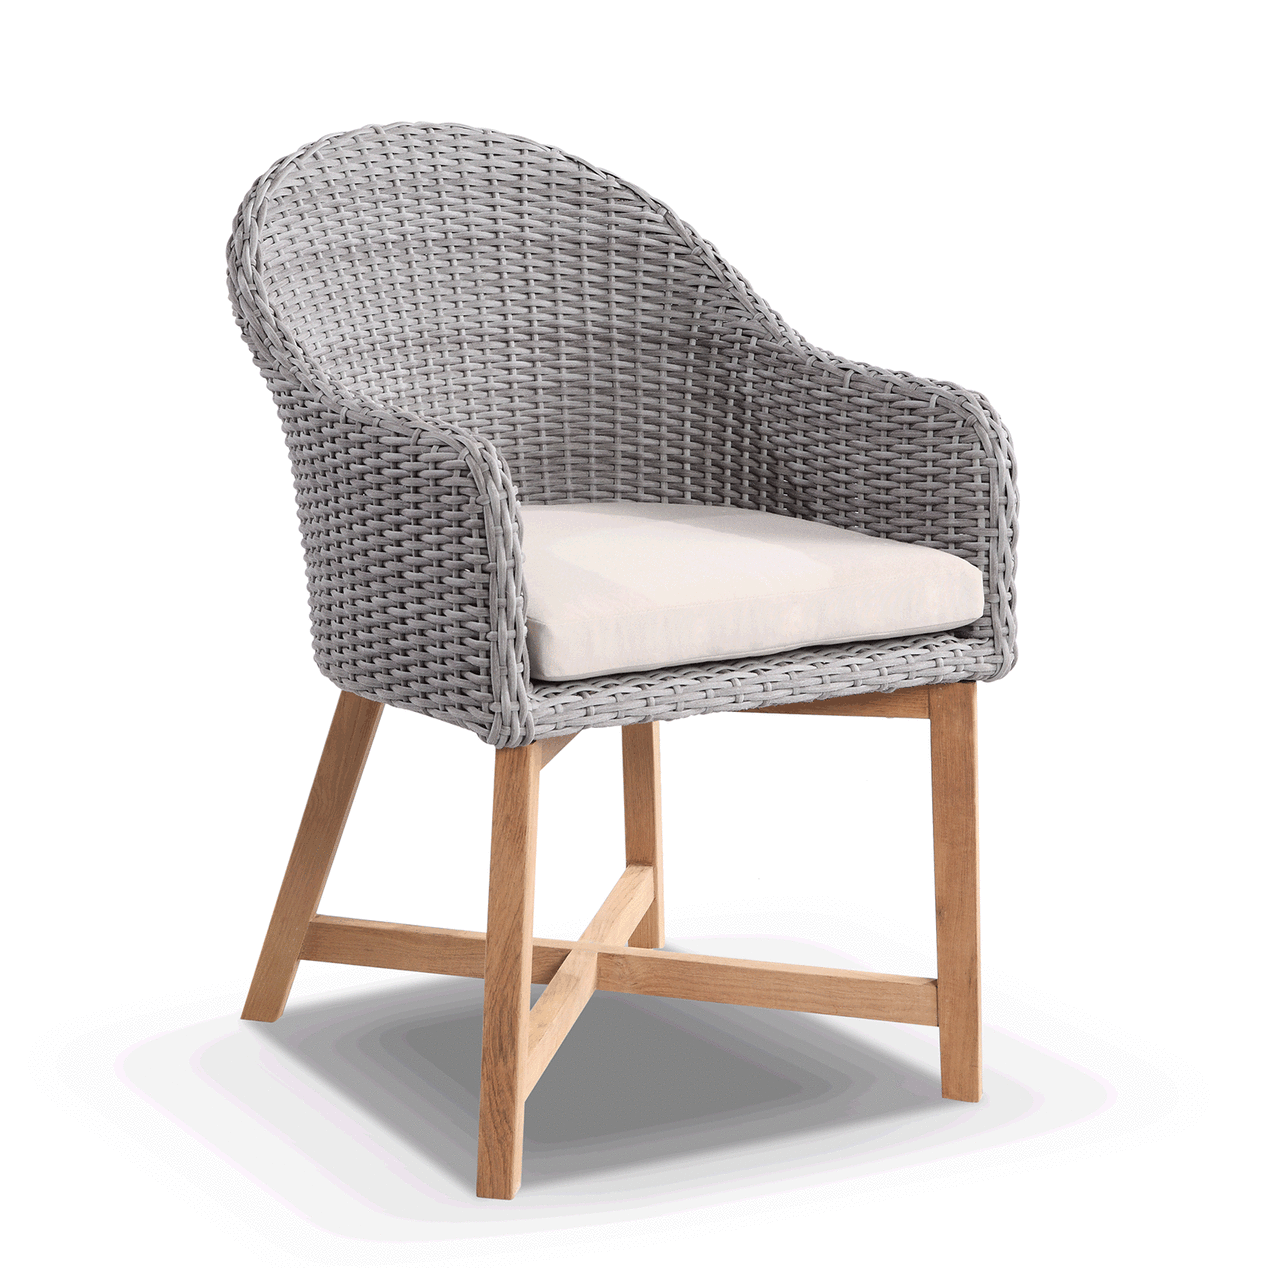 Outdoor Wicker Dining Chairs